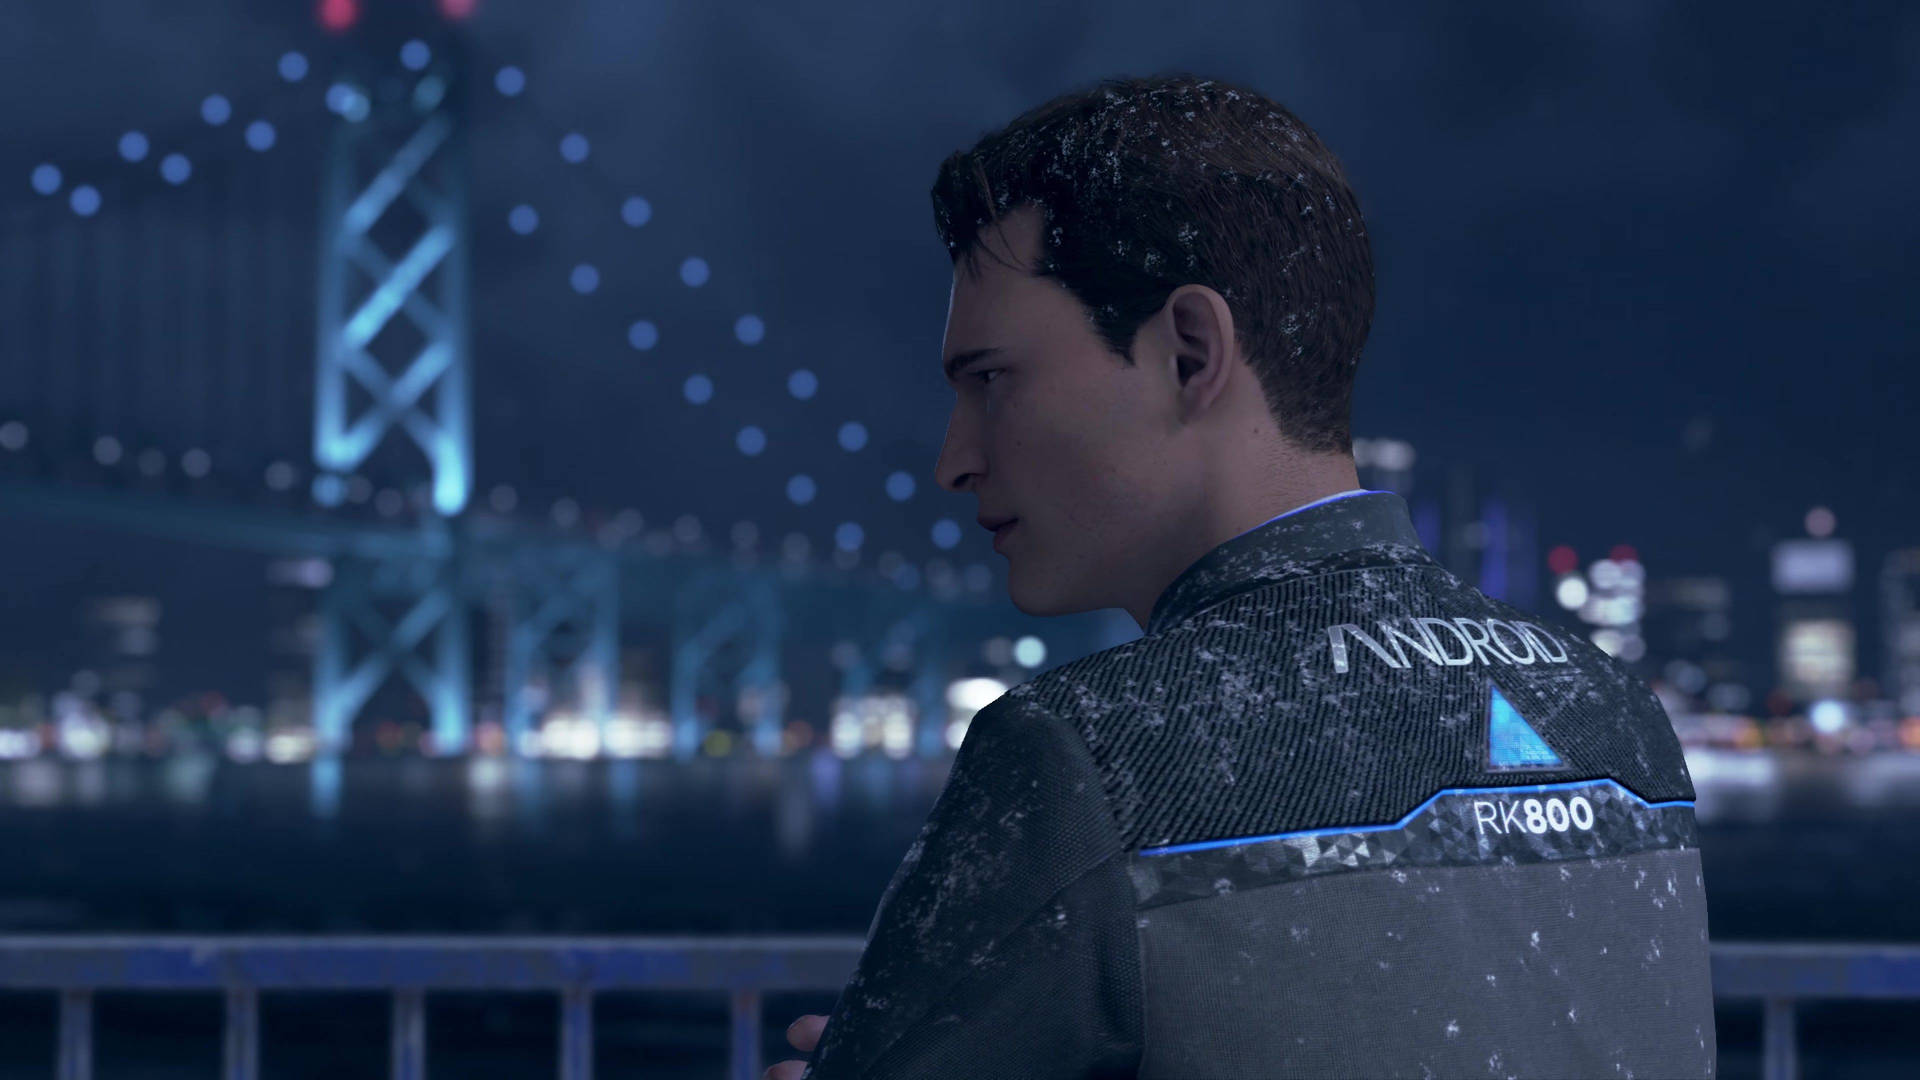 Detroit Become Human Background